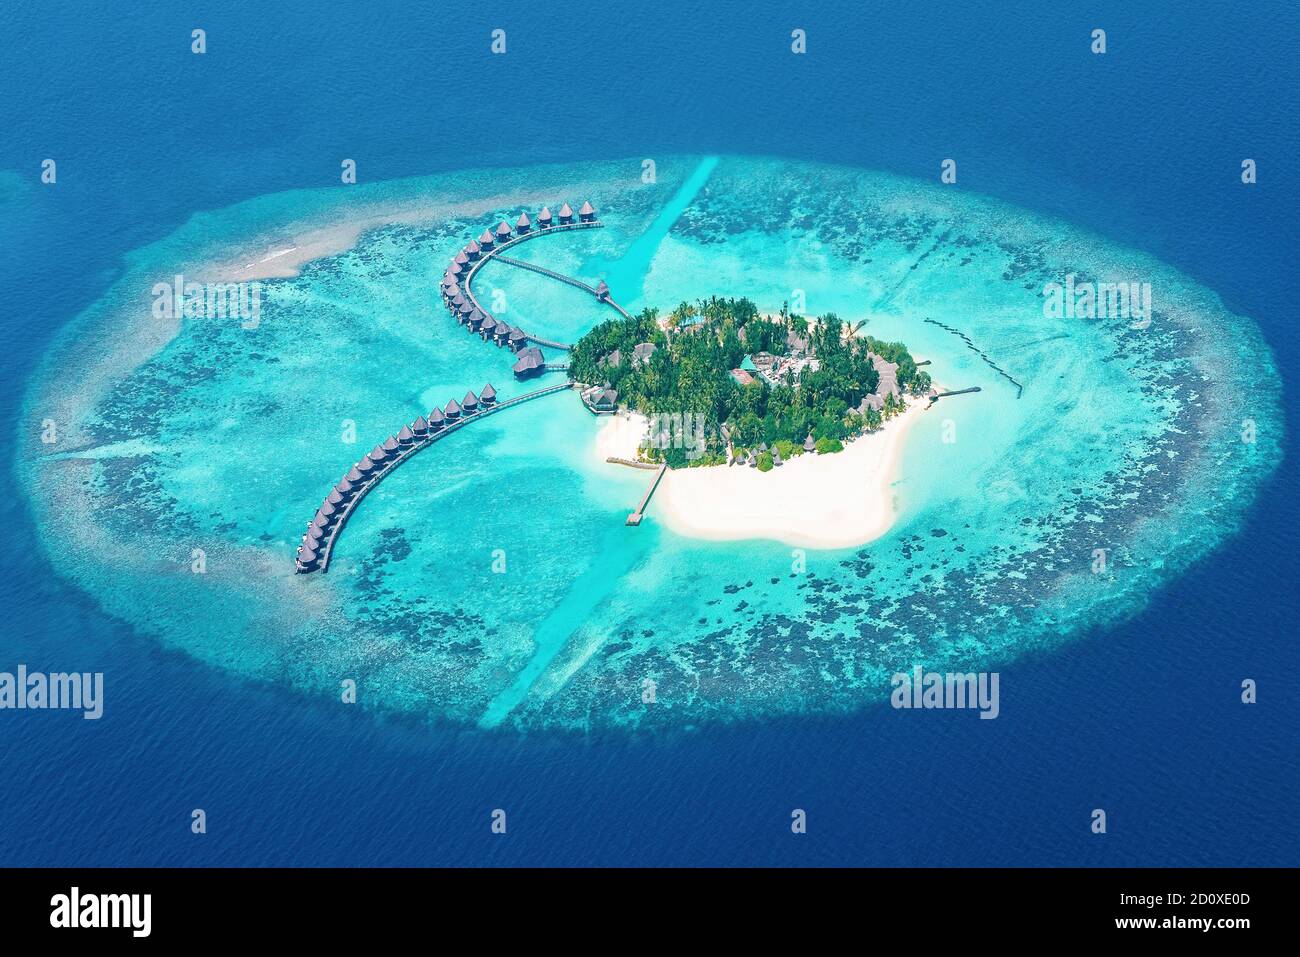 Just prior to landing at Male airport in the Maldives many small coral islands can be viewed from the plane windows. Stock Photo